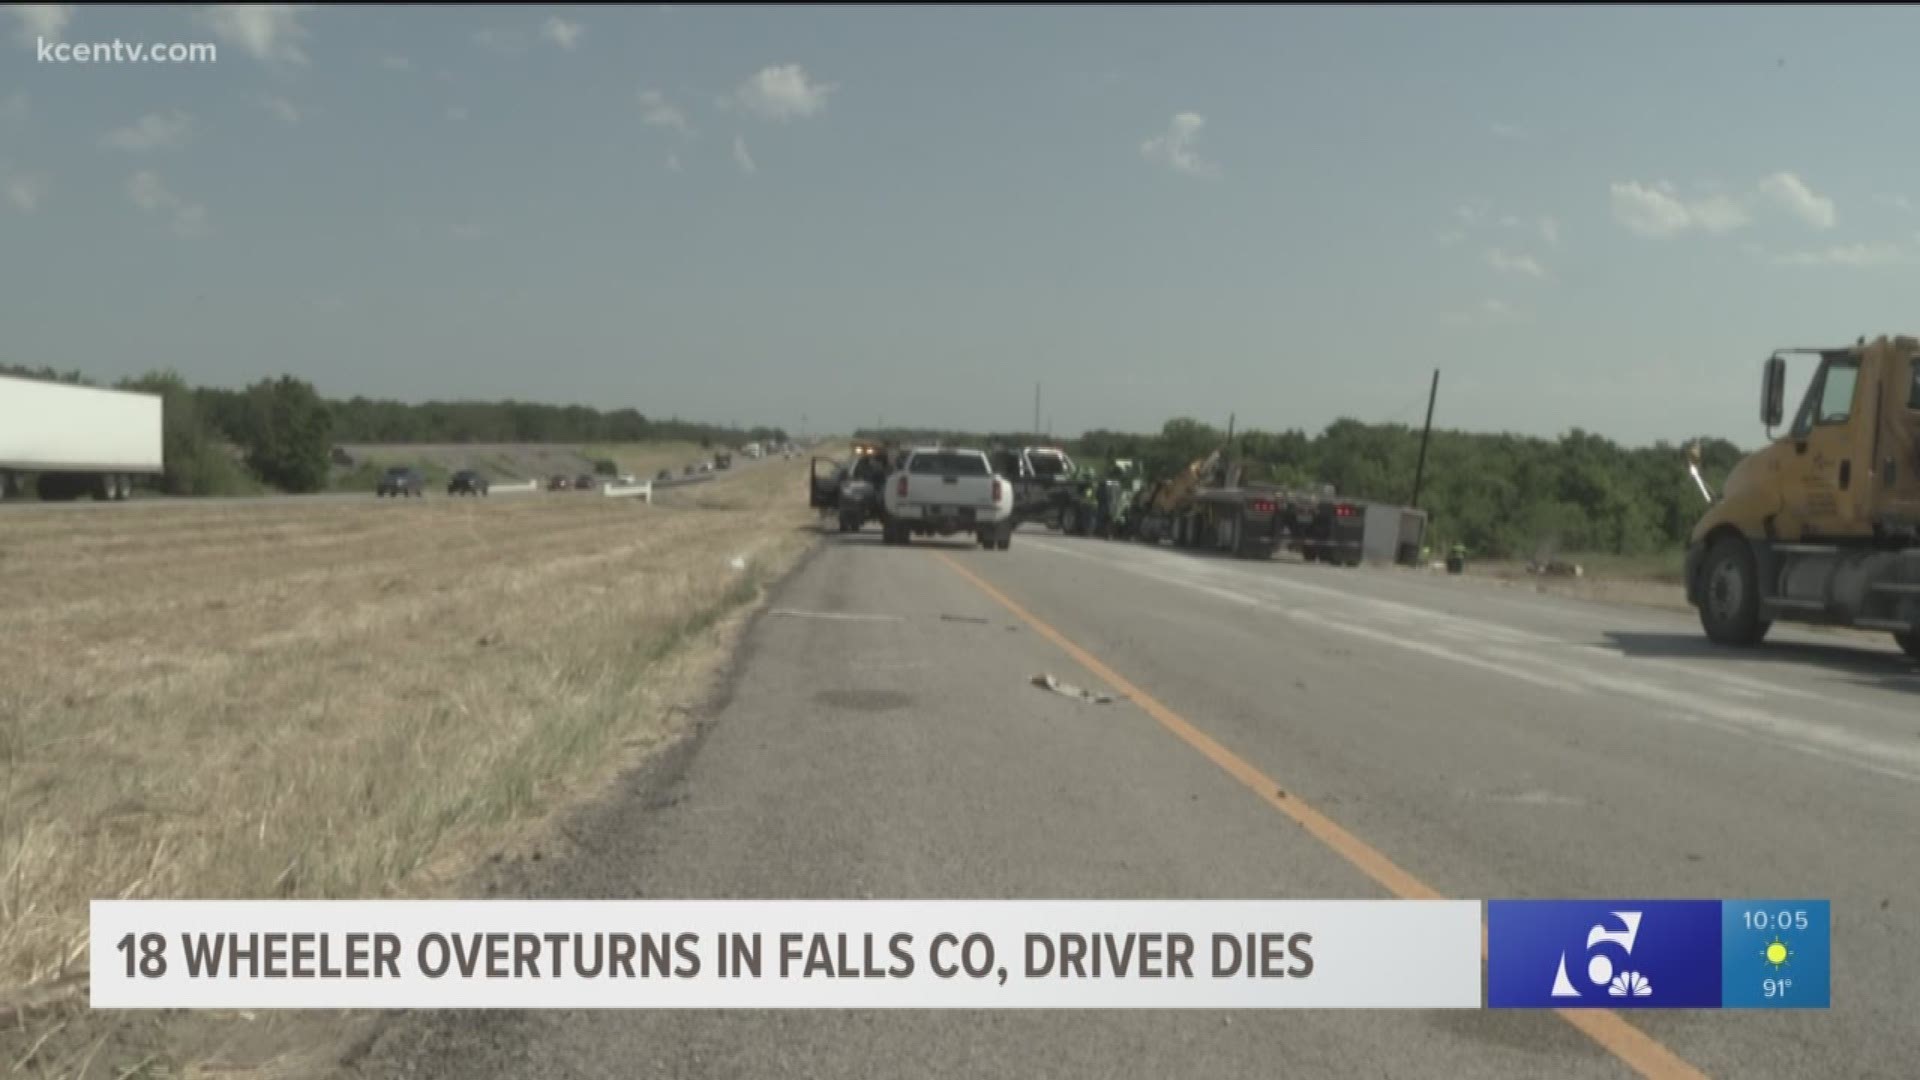 Authorities have identified the man who died in a semi rollover crash in Falls County. 